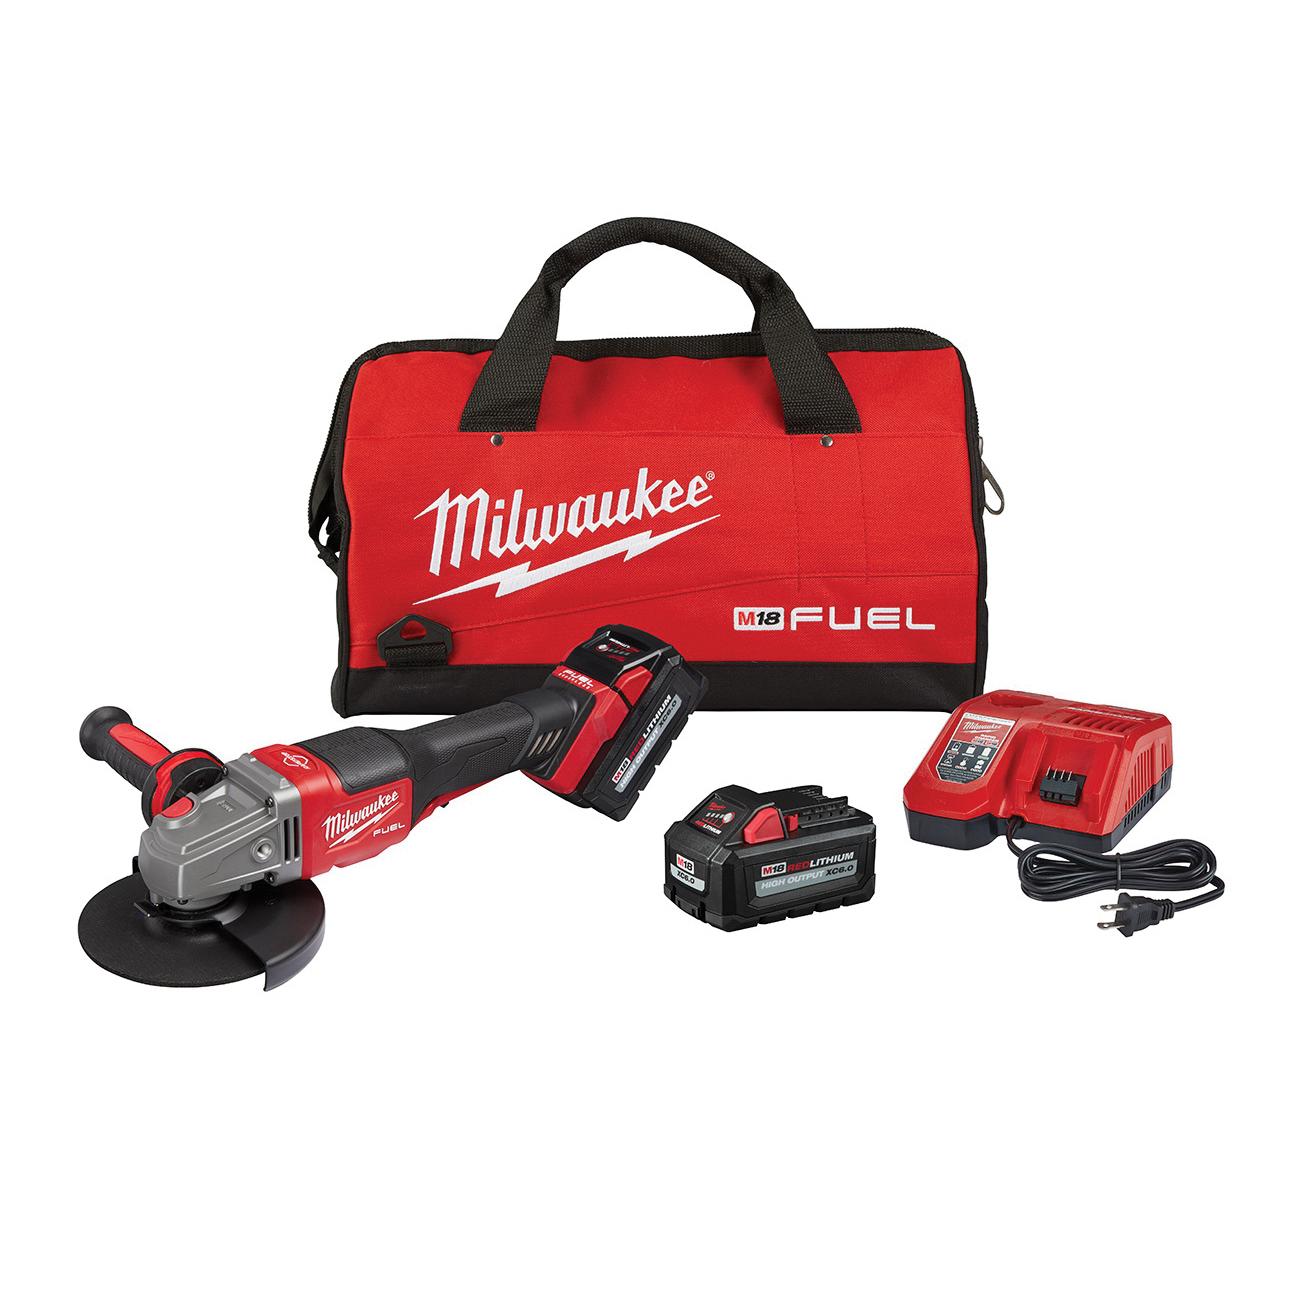 Milwaukee® M18 FUEL™ 2980-21 Braking Small Cordless Angle Grinder Kit With Paddle Switch Kit, 6 in Dia Wheel, 5/8 in Arbor/Shank, 18 V, Lithium-Ion Battery, 1 Batteries, Paddle Switch